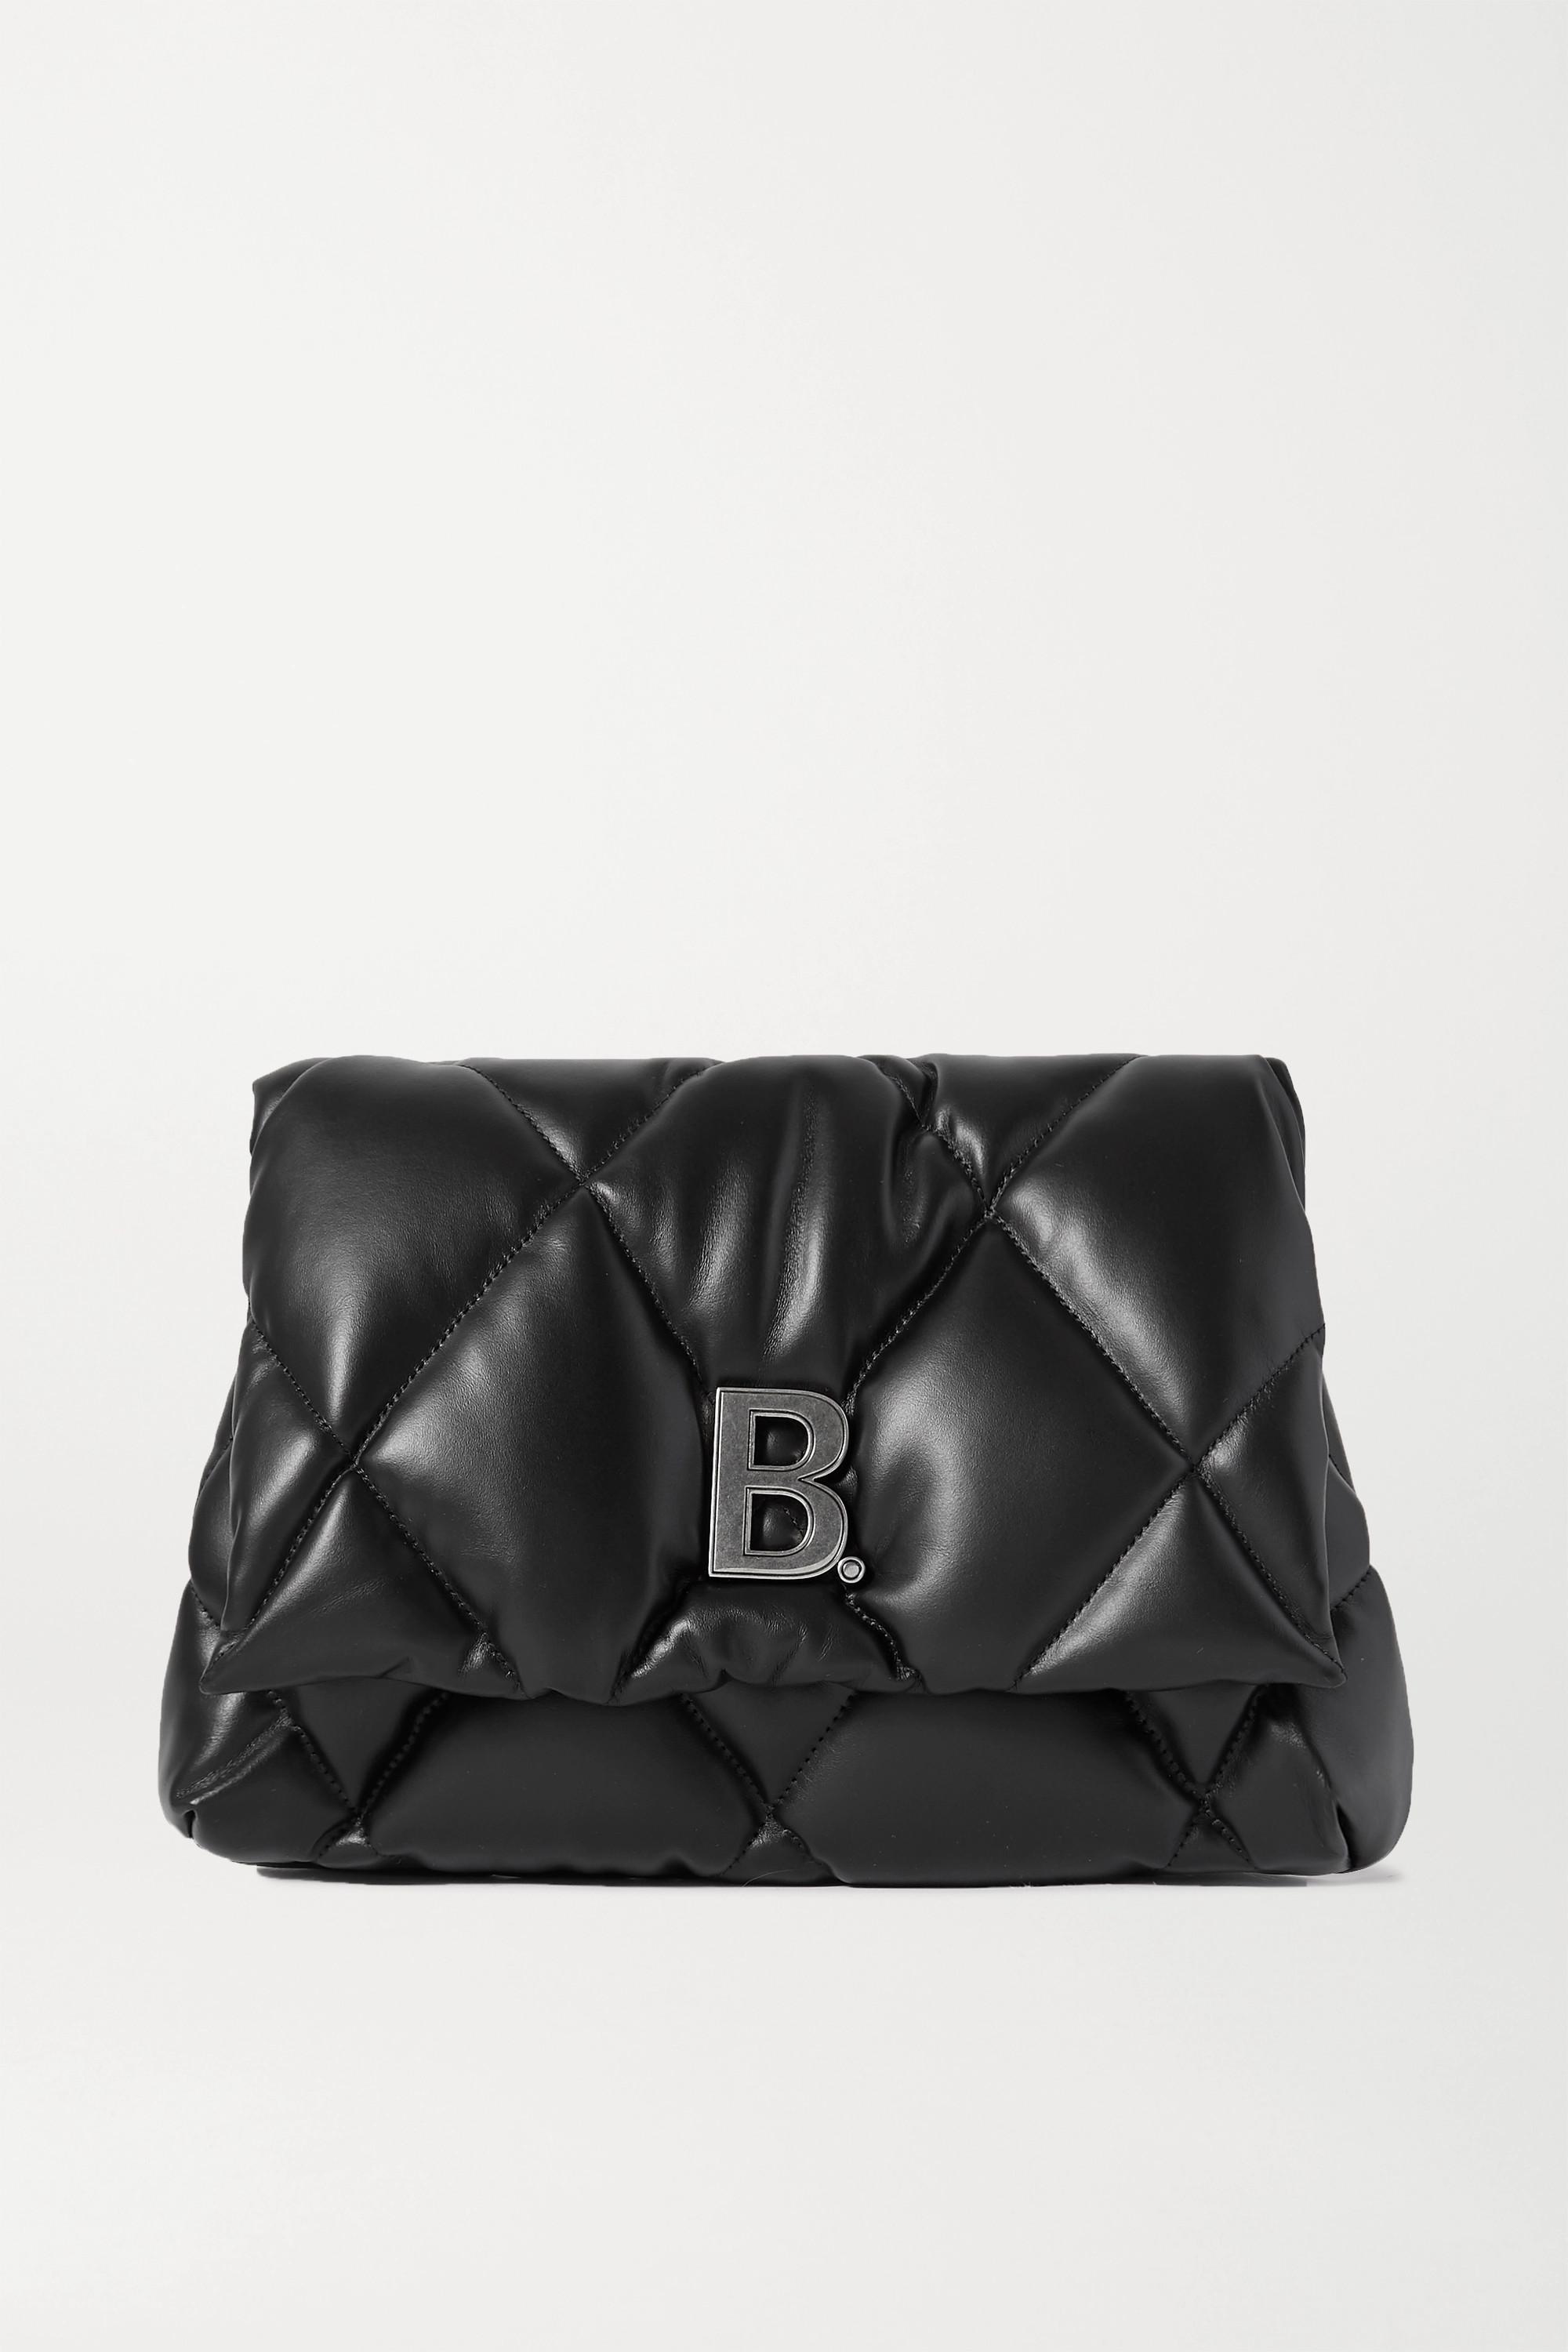 Balenciaga Touch Puffy Embellished Quilted Leather Clutch in Black